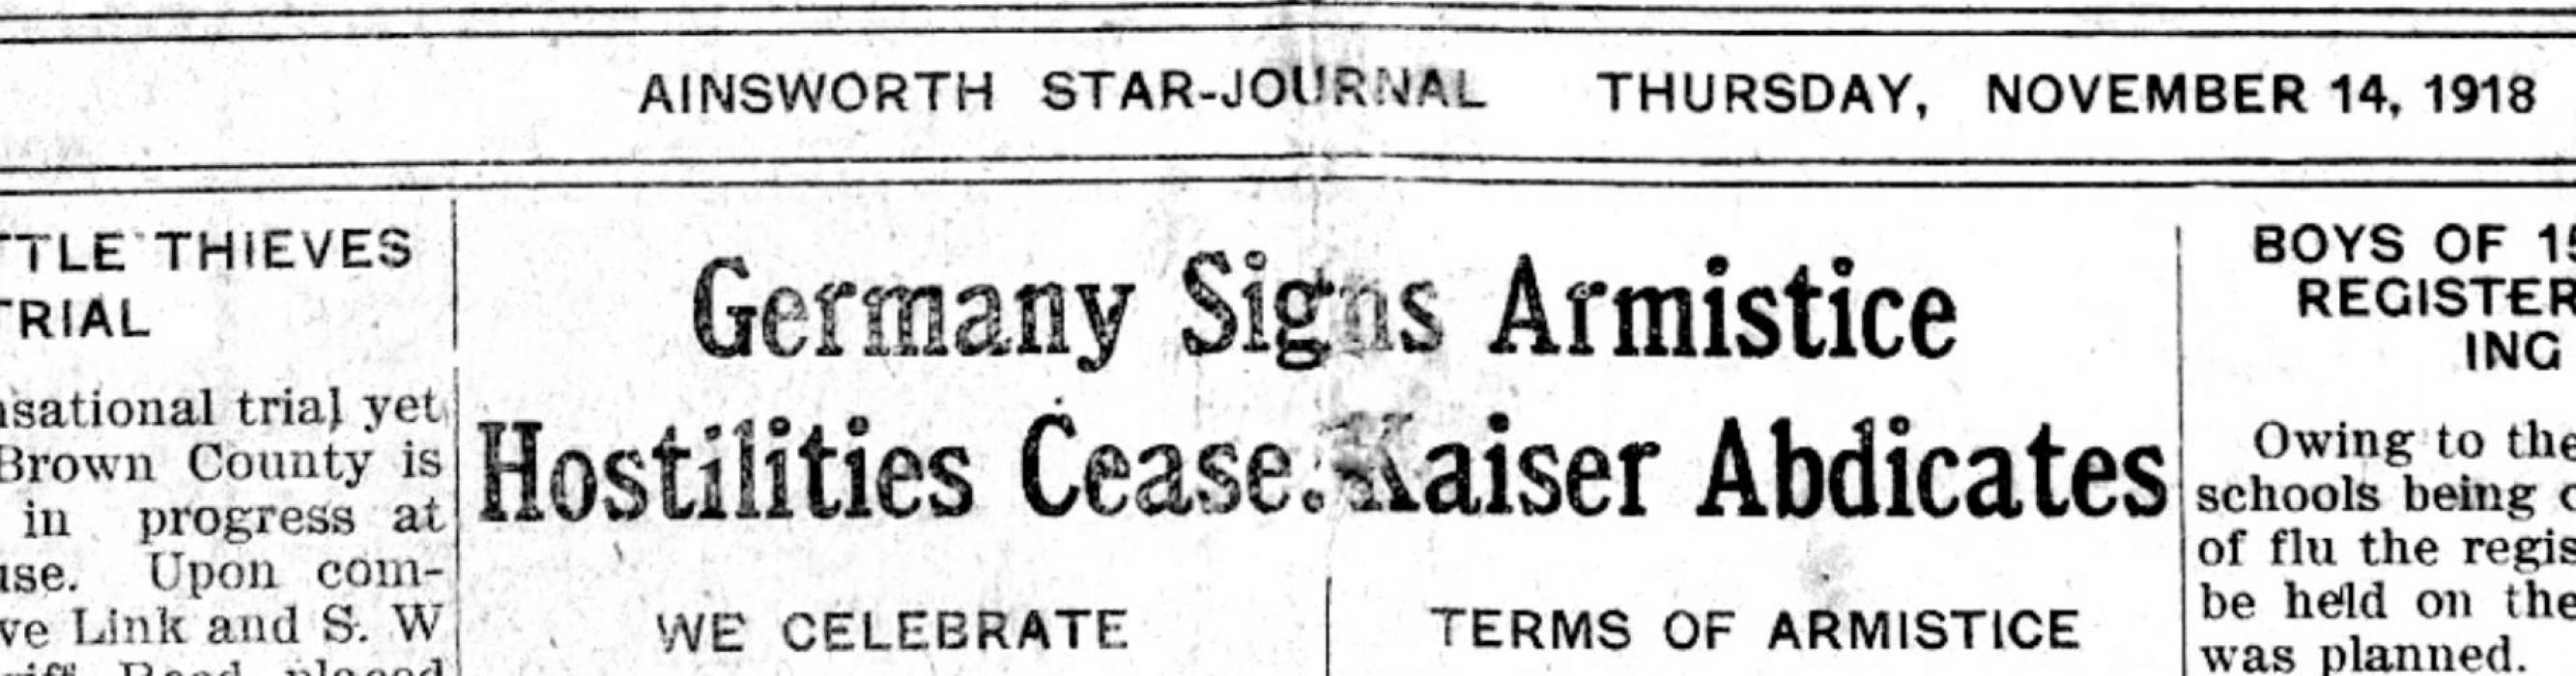 Before Veterans Day was made an official holiday by President Eisenhower in 1954, November 11th was Armistice Day: the day World War I ended when the Allied powers signed a ceasefire agreement with Germany at 11:00 a.m. November 11, 1918. The image above shows the Ainsworth Star-Journal’s announcement three days later.